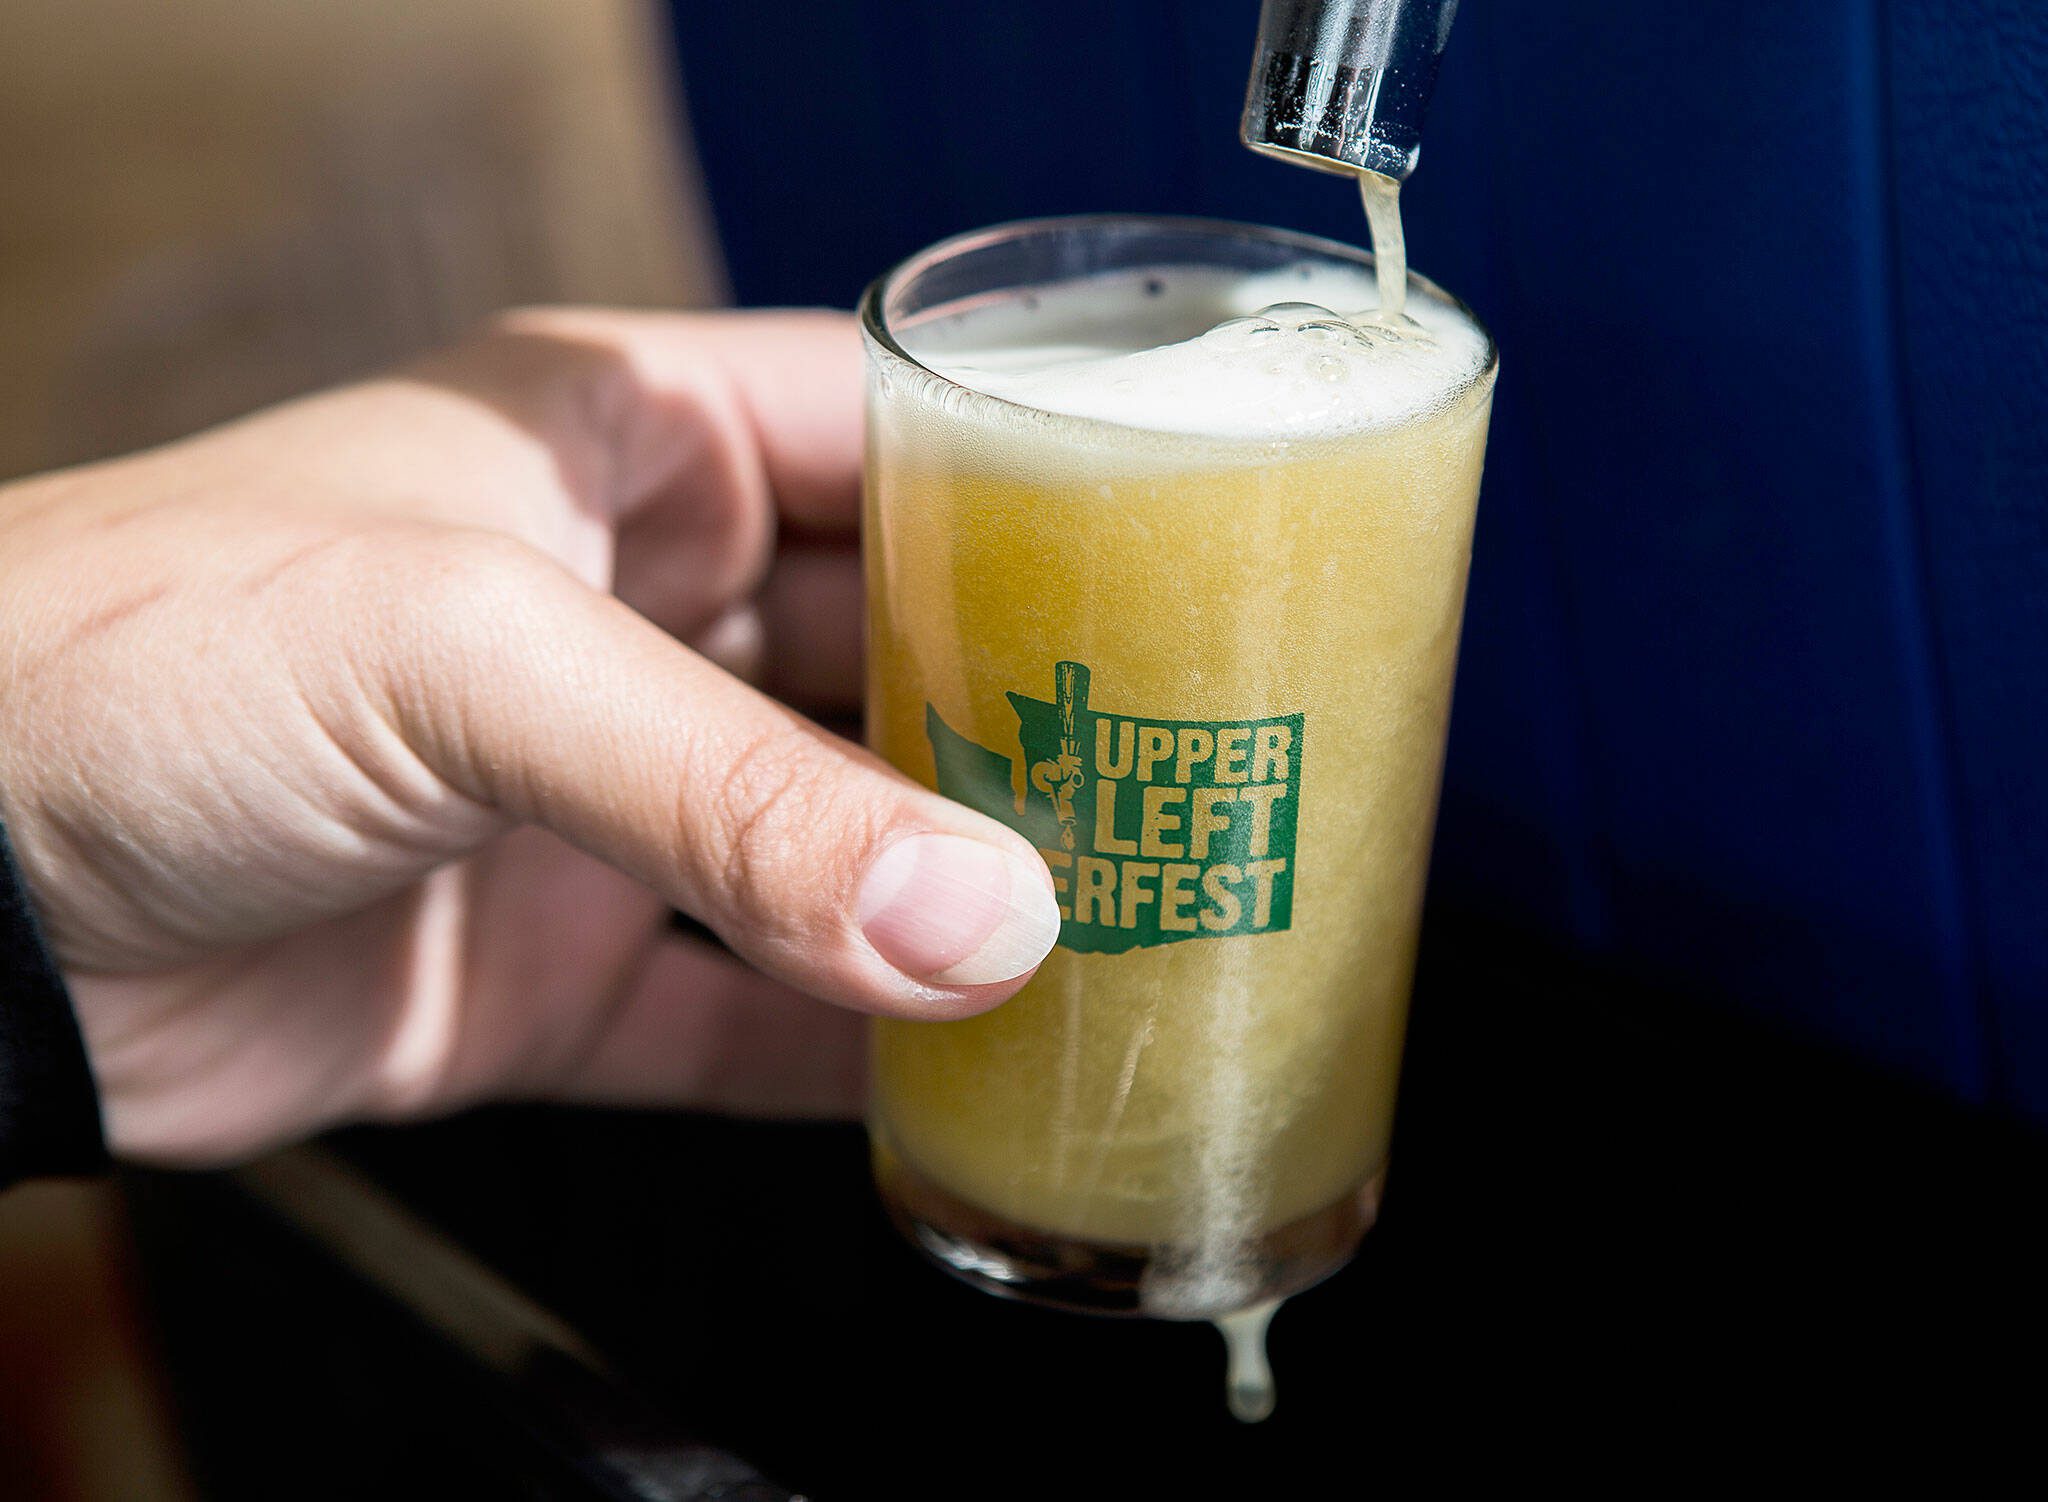 A beer is poured at UpperLeft Beerfest on Saturday, Aug. 24, 2019 in Everett, Wash. (Olivia Vanni / The Herald)